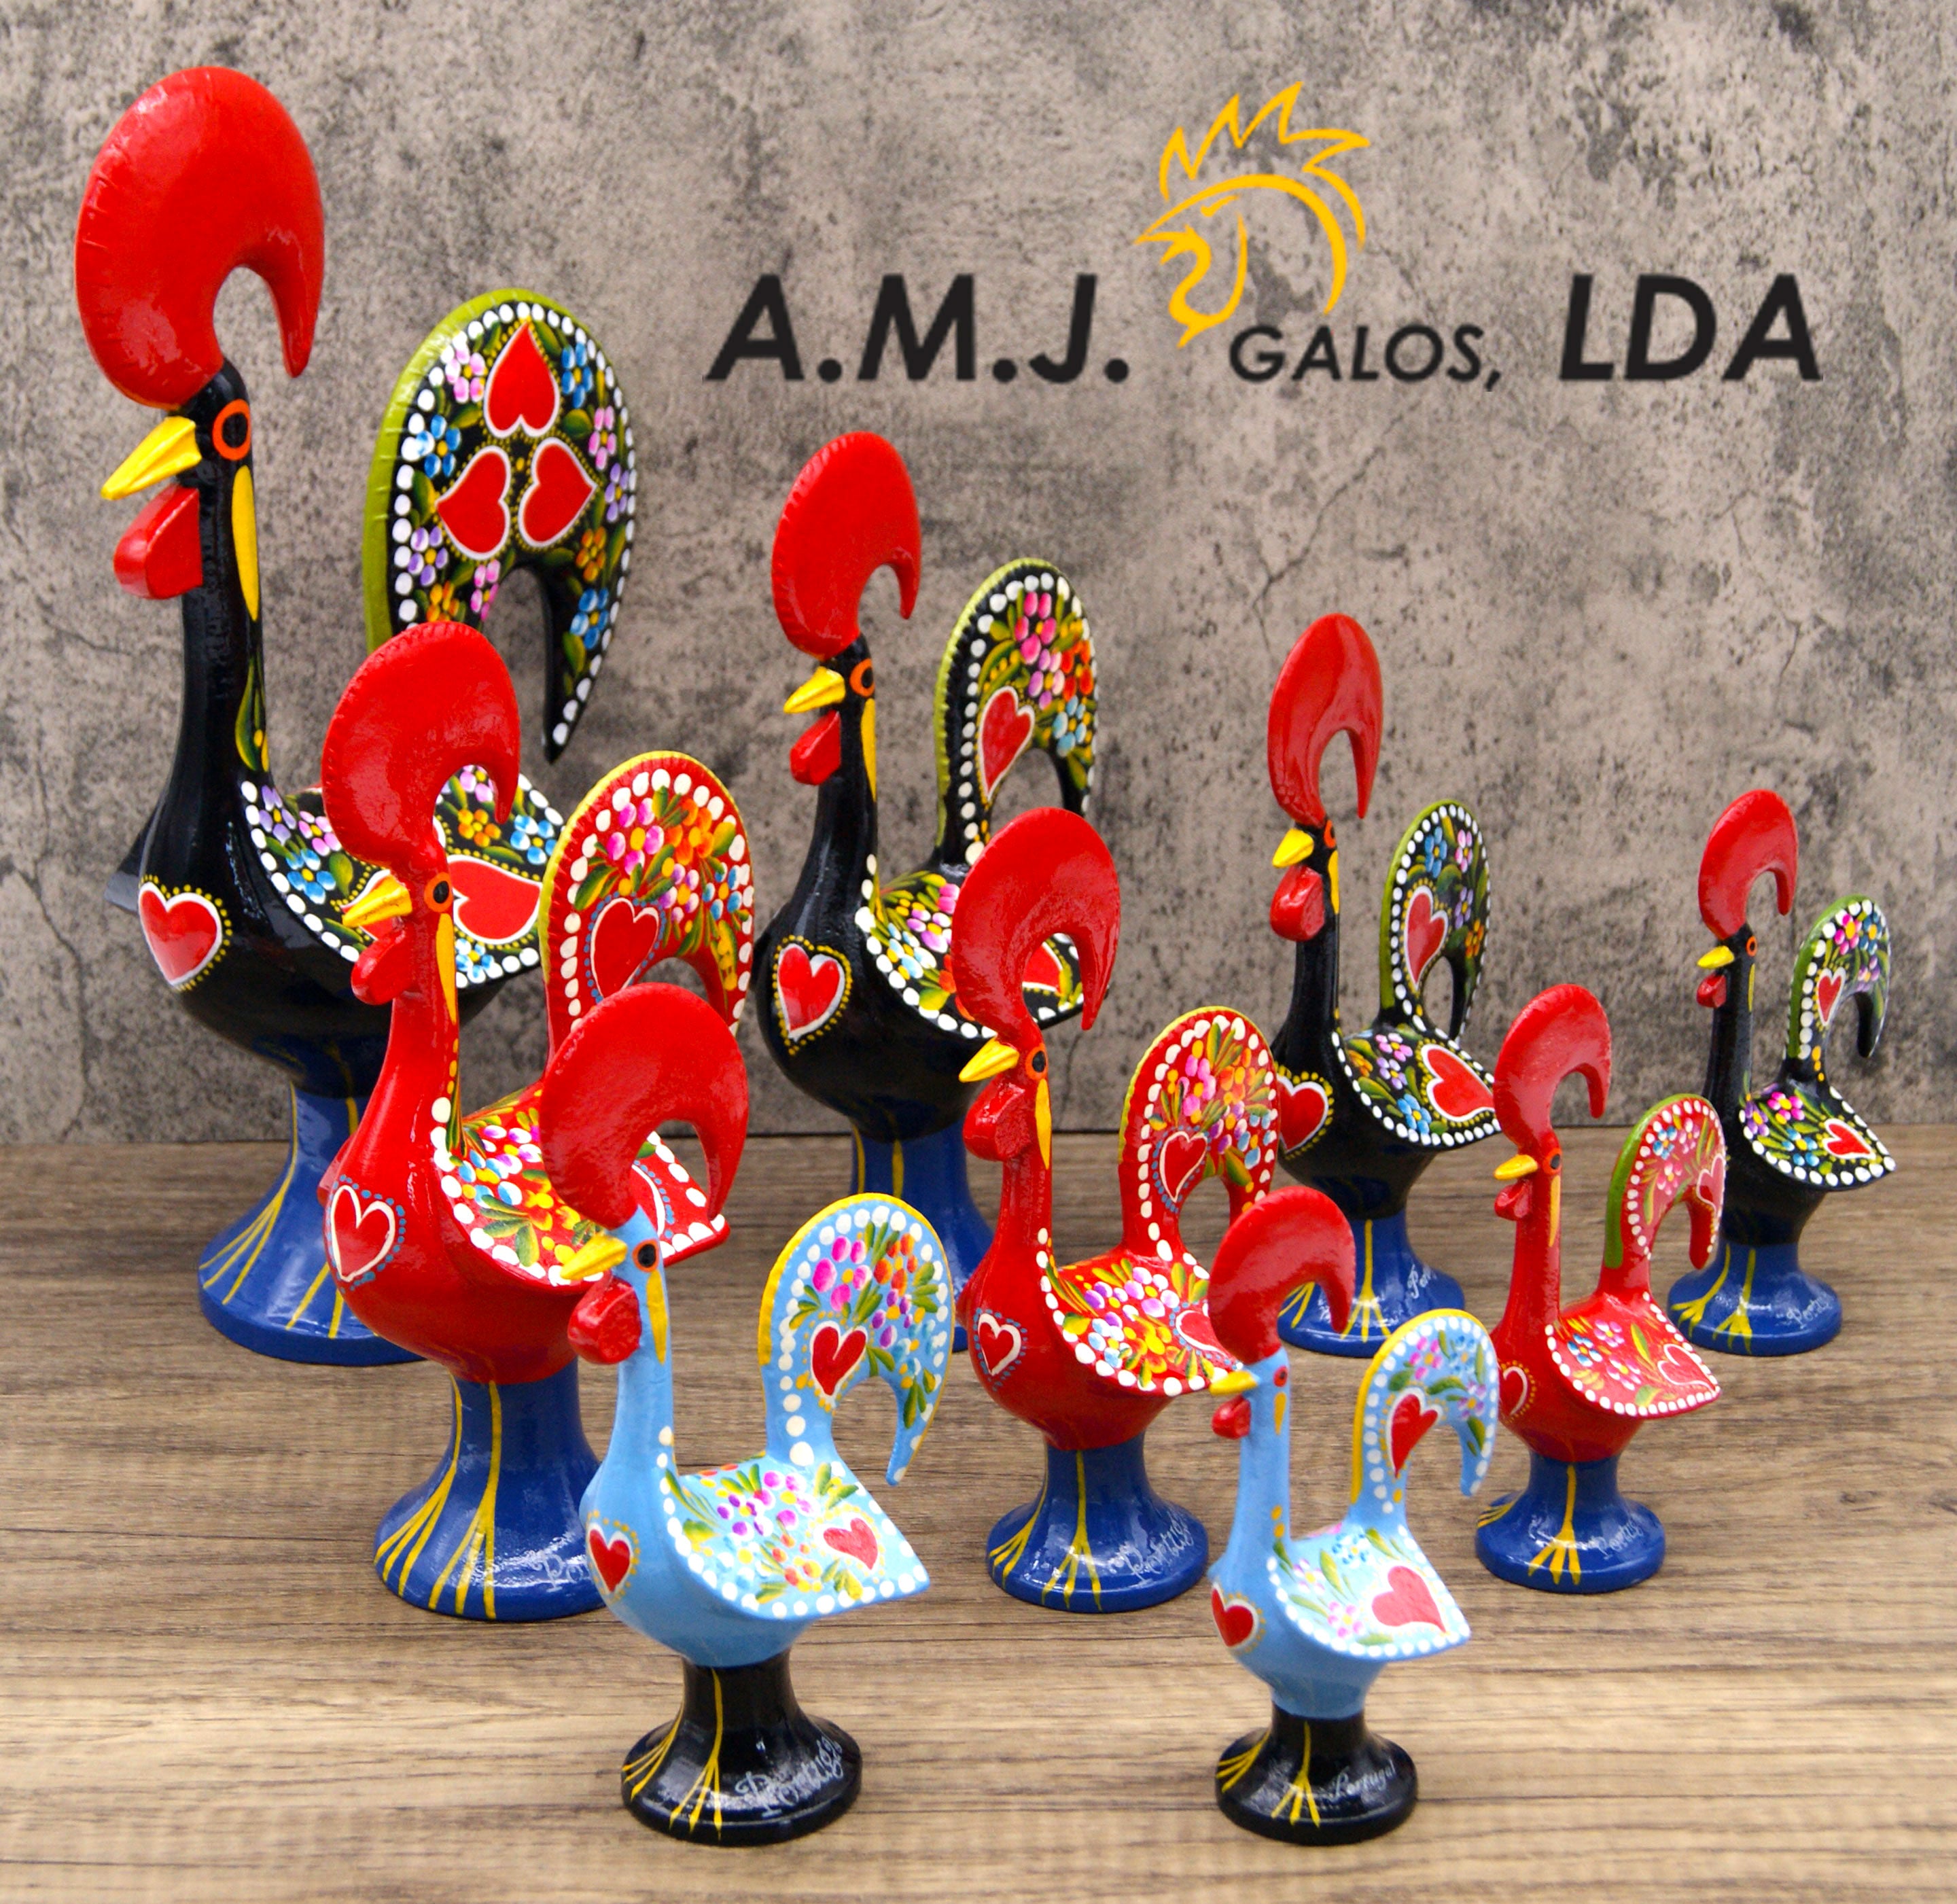 Traditional Portuguese Rooster figurines, keychains, nutcrackers, bottler stoppers and more, handmade and hand painted in Portugal by a family of master artisans.